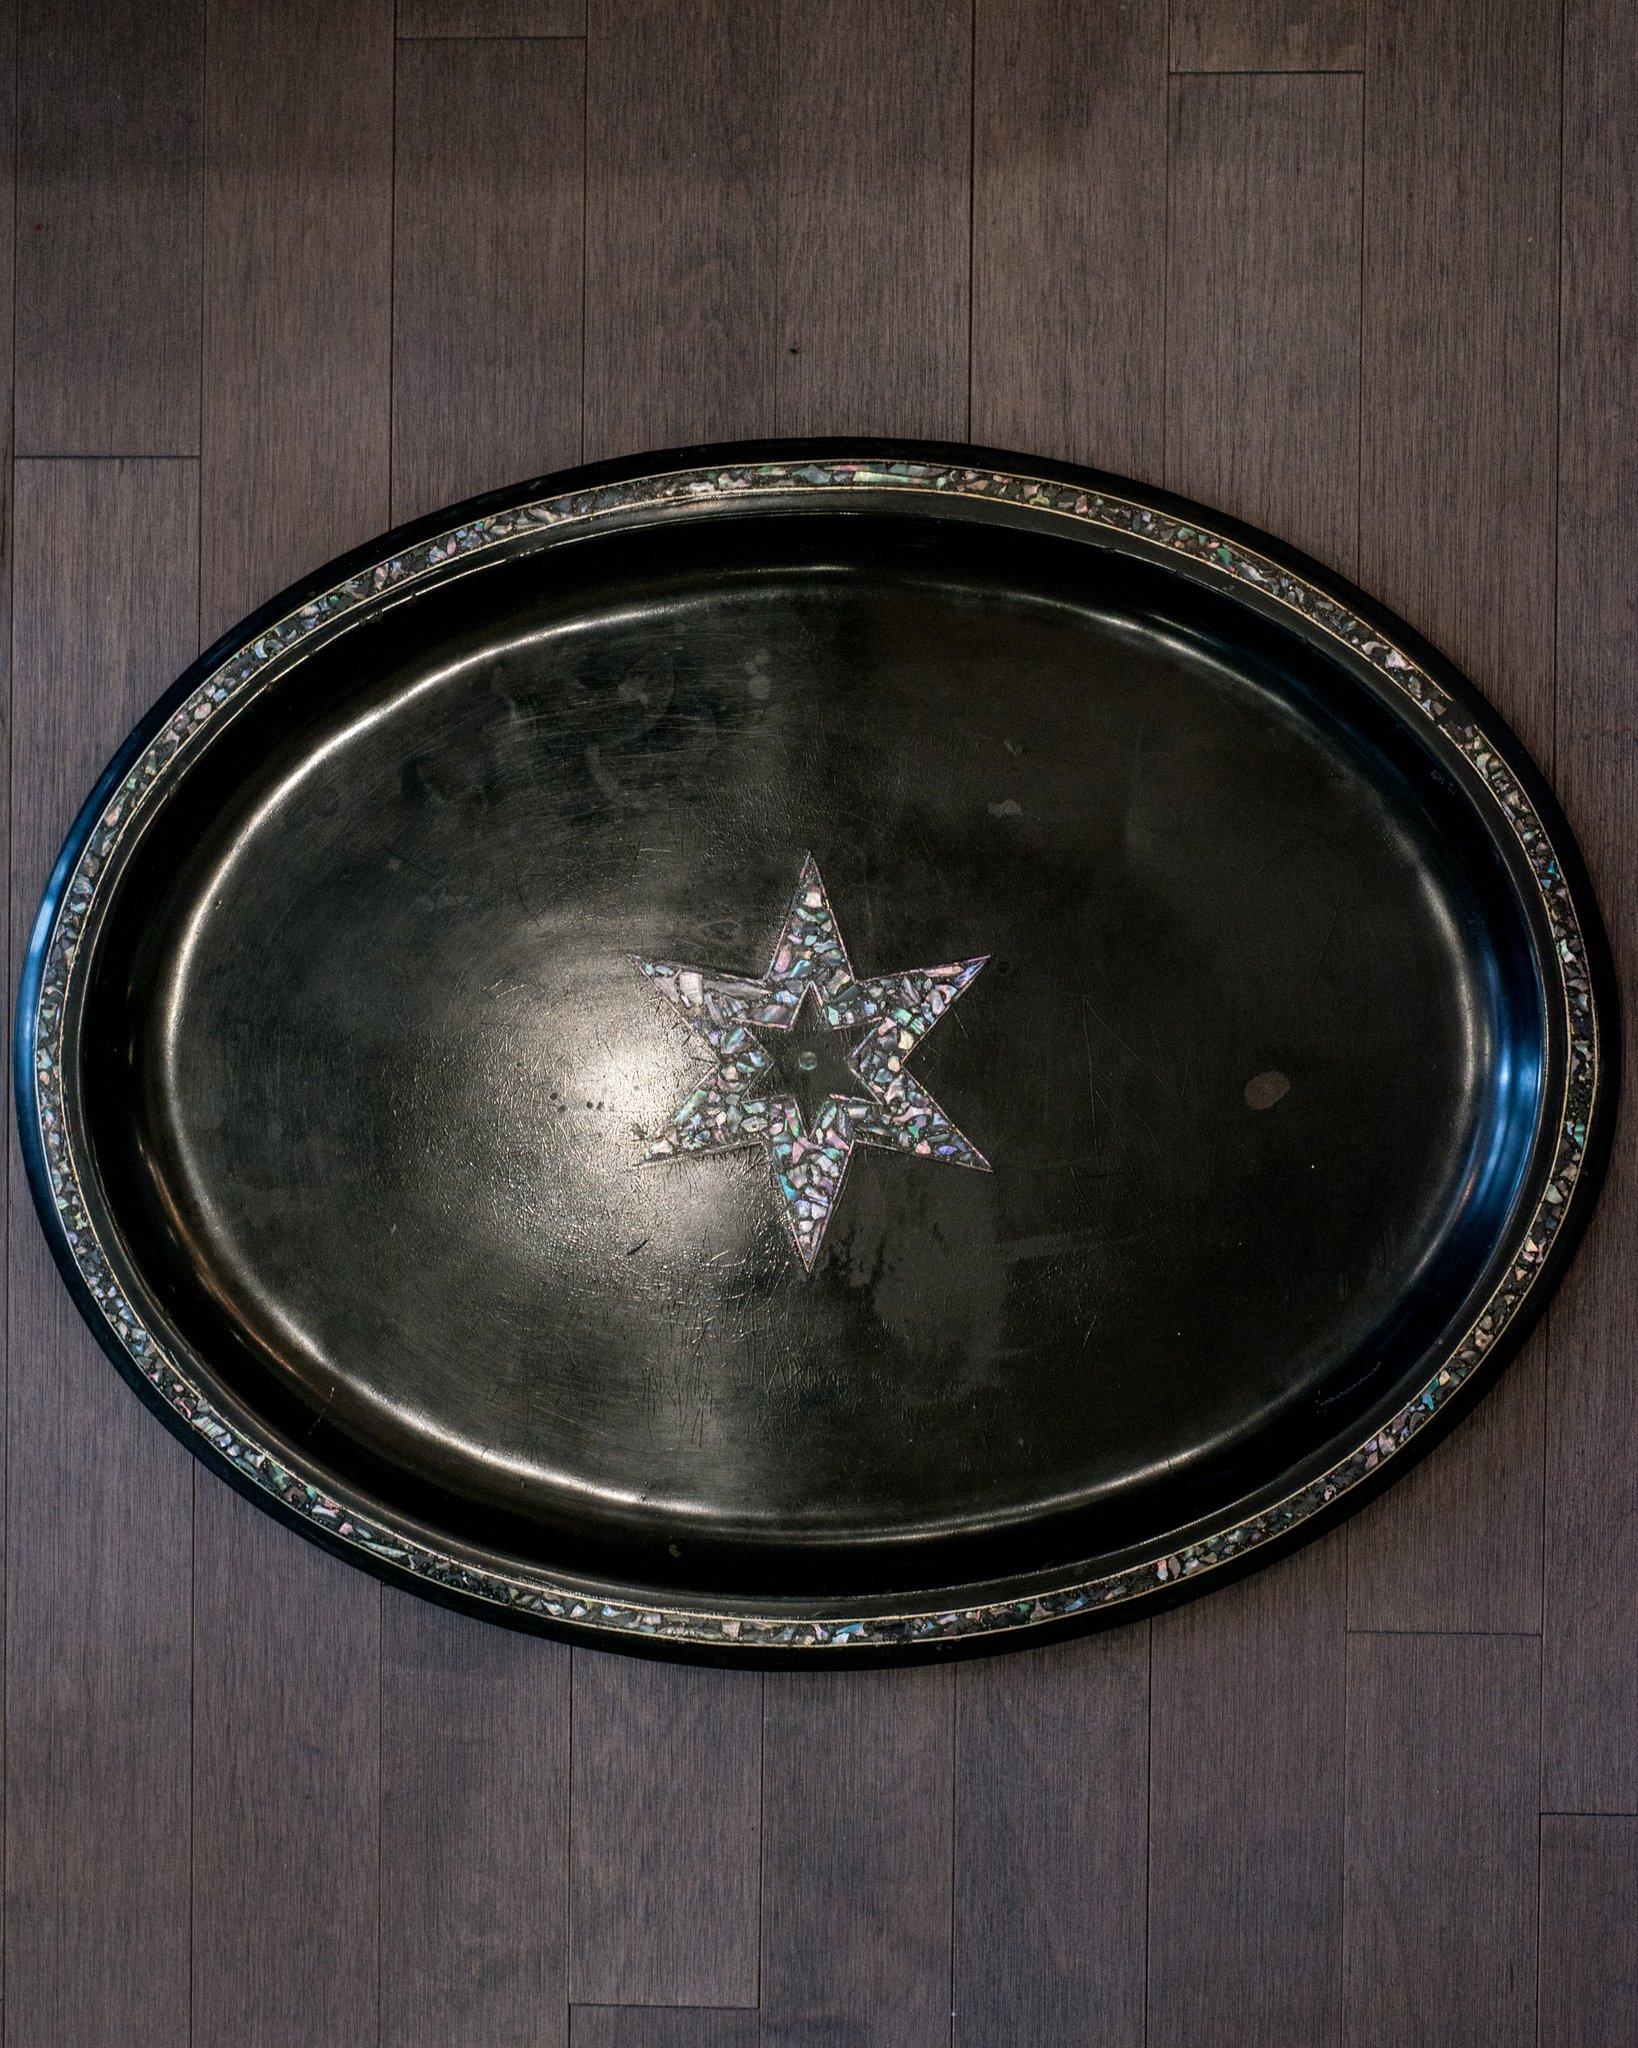 This unique antique Dutch metal tray with mother of pearl inlaid star motif was sourced on a trip to Holland.